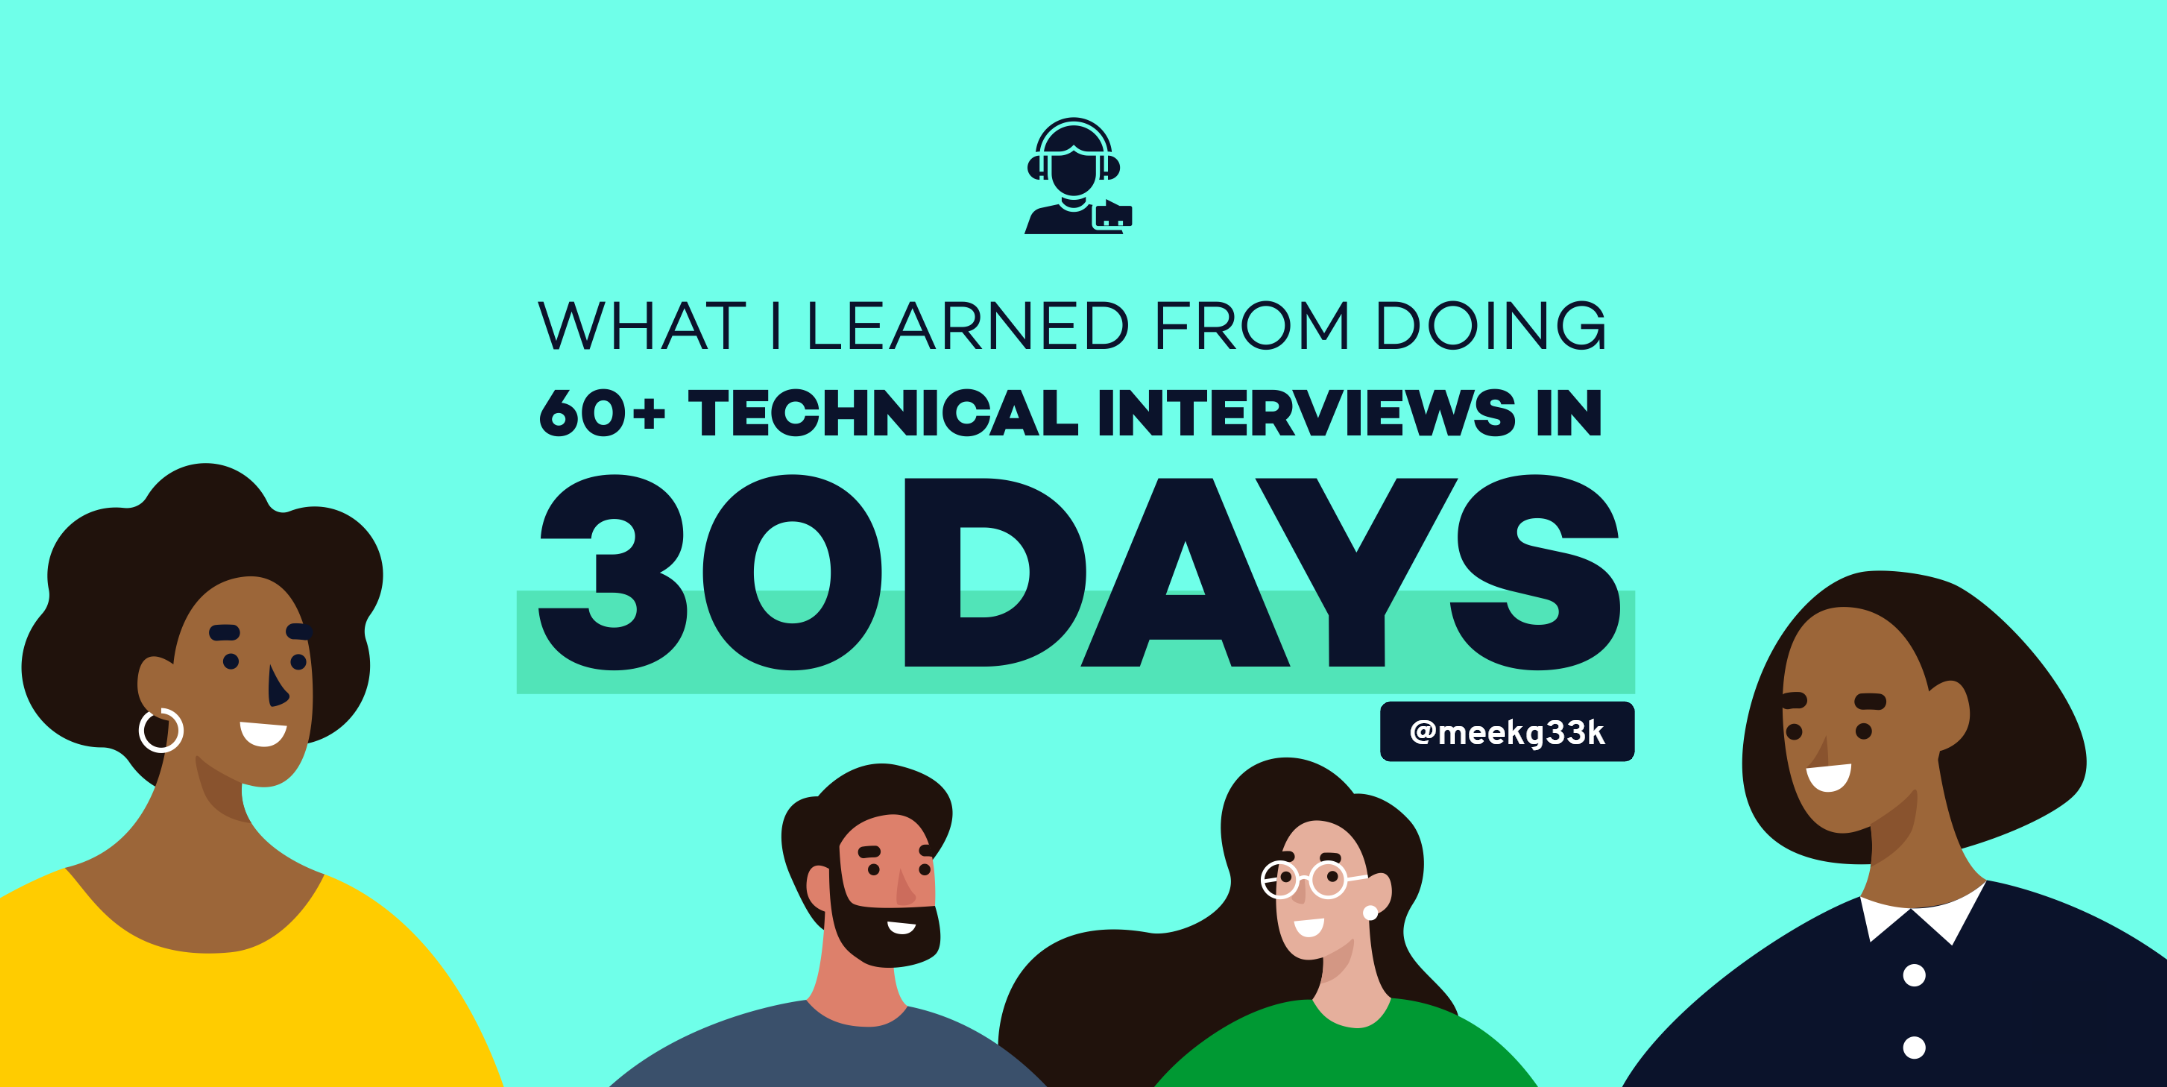 What I Learned from Doing 60+ Technical Interviews in 30 Days